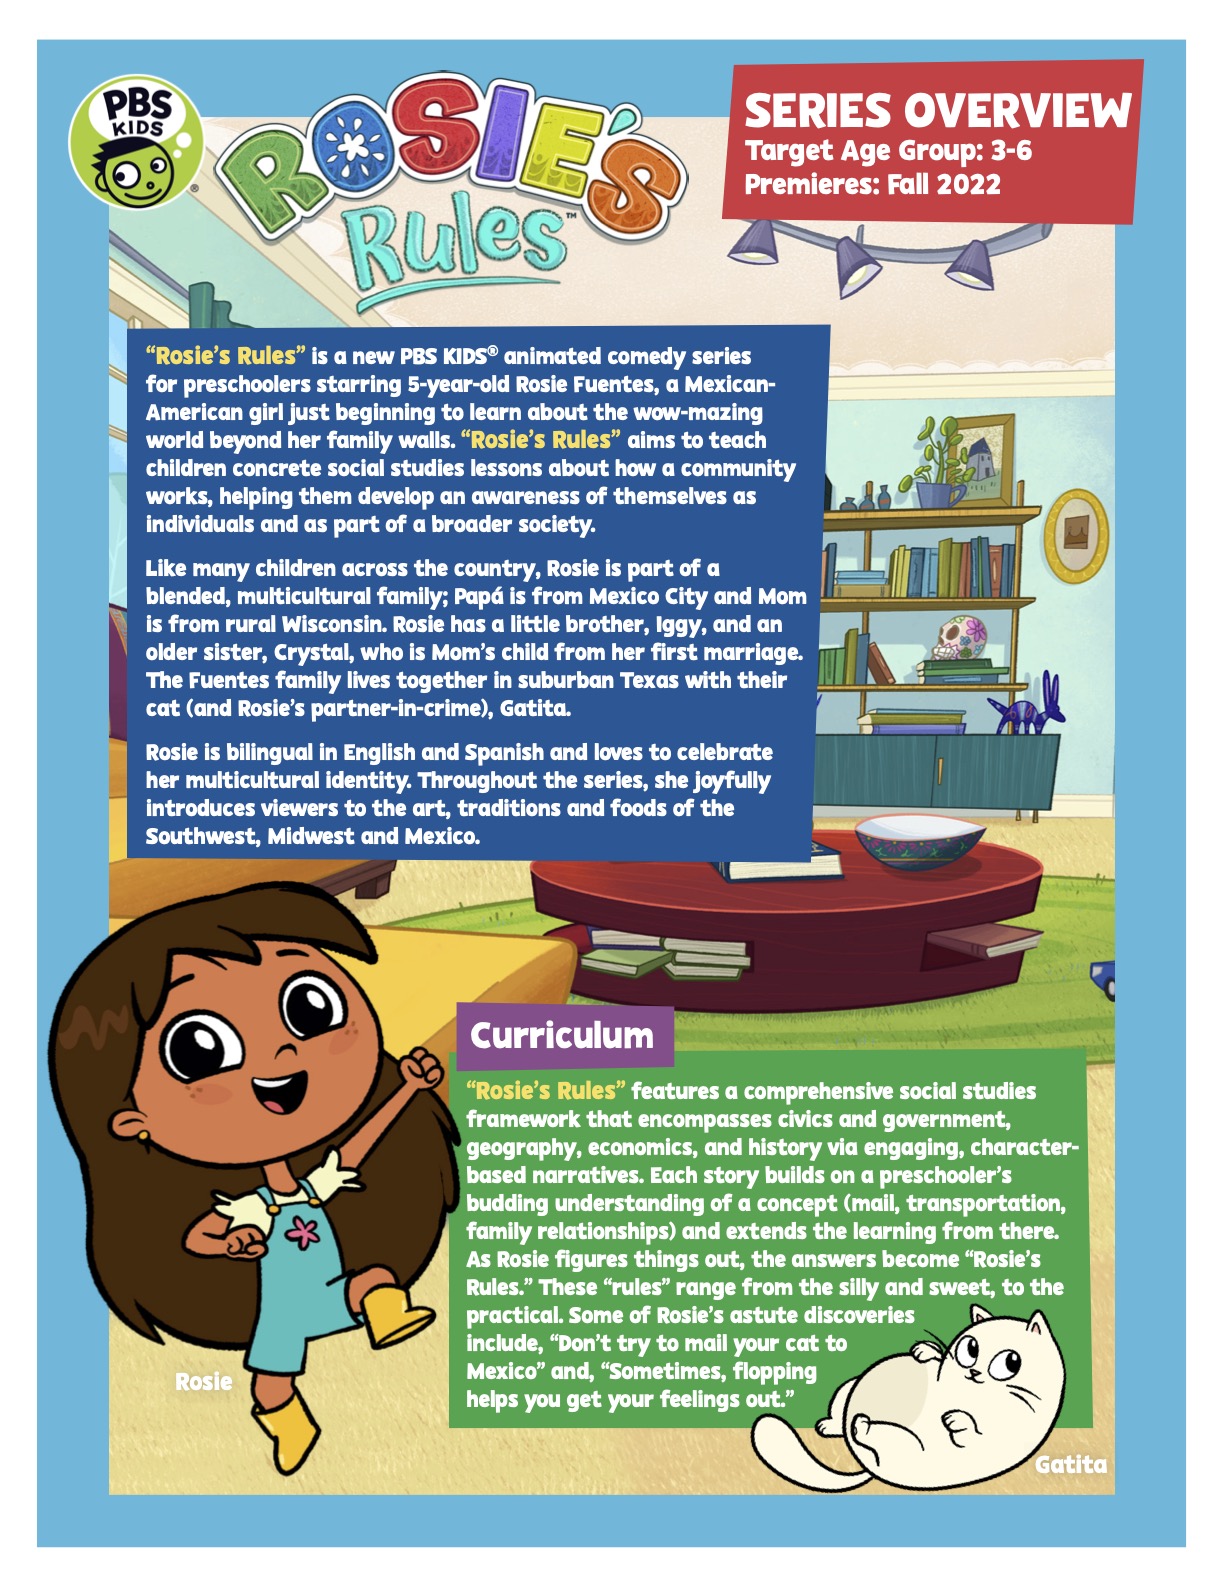 Series overview for new PBSKids show "Rosie's Rules"